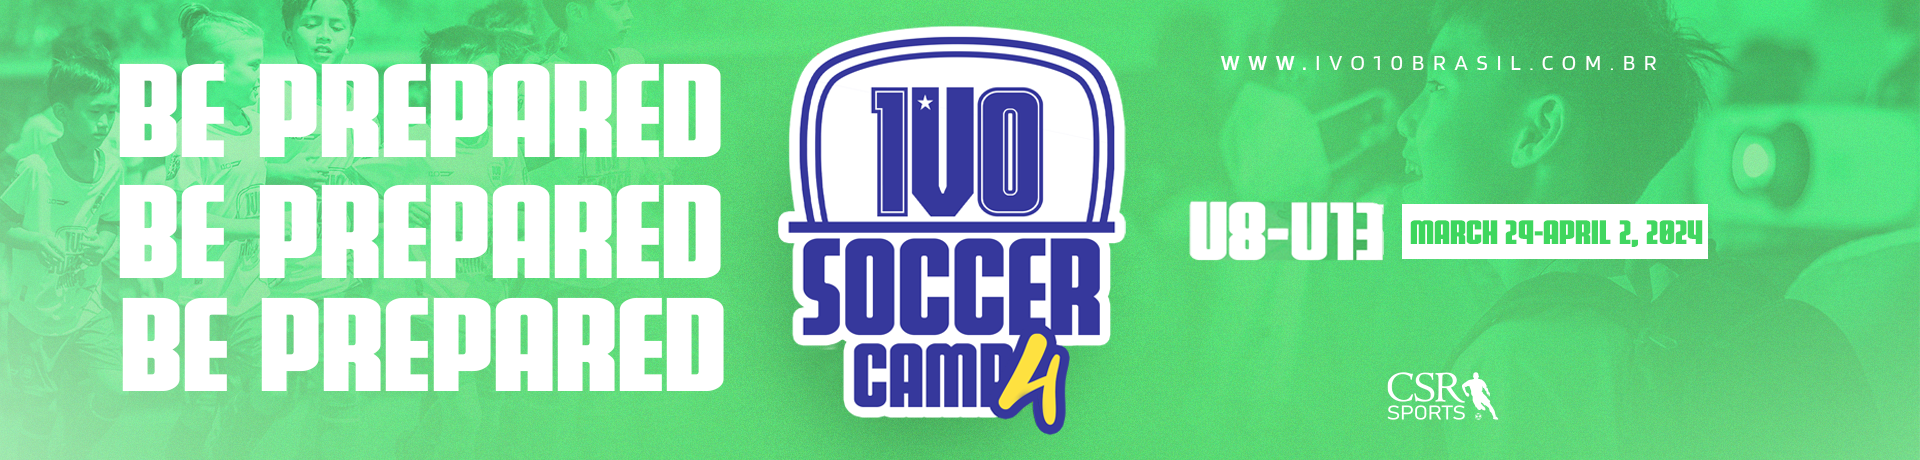 Ivo Soccer Camp 4 - March, 29 to April, 2, 2024